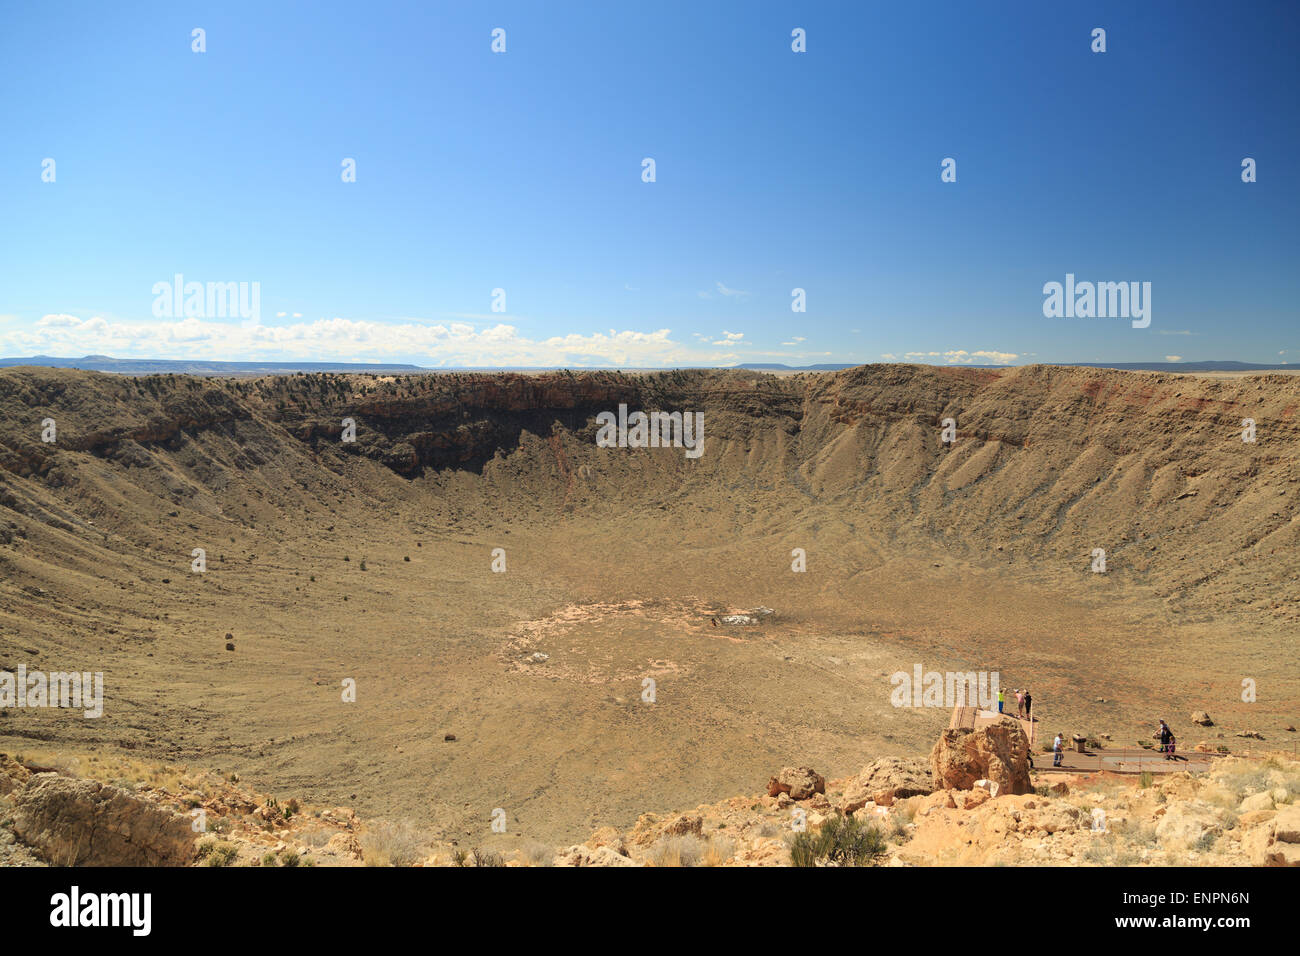 A photograph of the Meteor Crater near Flagstaff in Arizona. It is proclaimed to be 'best preserved meteorite crater on Earth''. Stock Photo